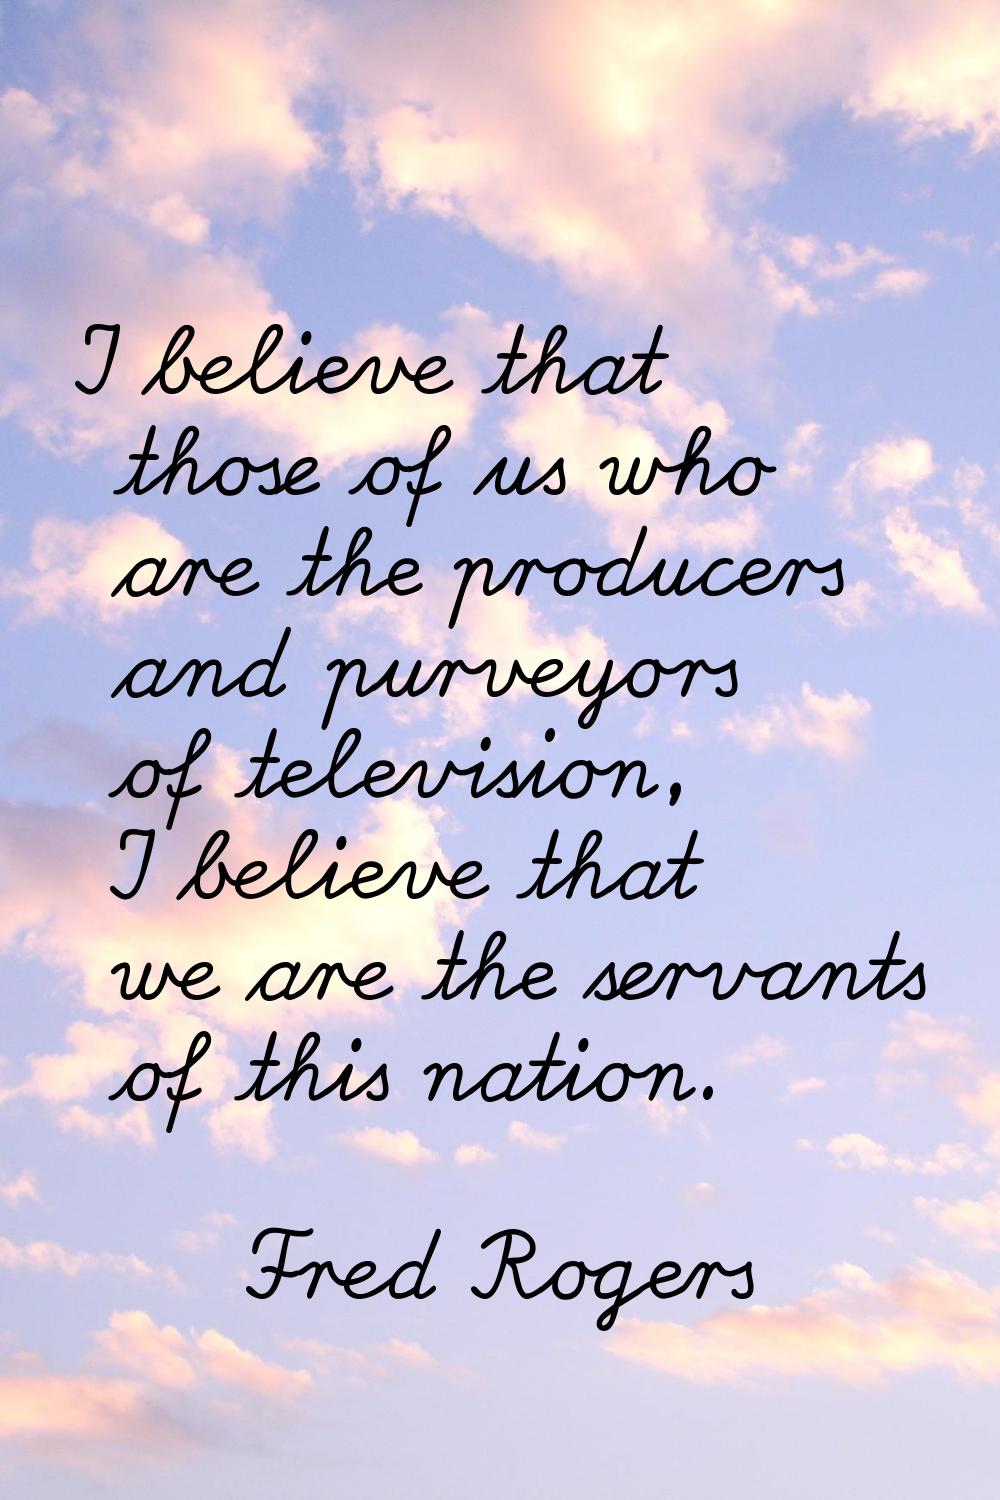 I believe that those of us who are the producers and purveyors of television, I believe that we are